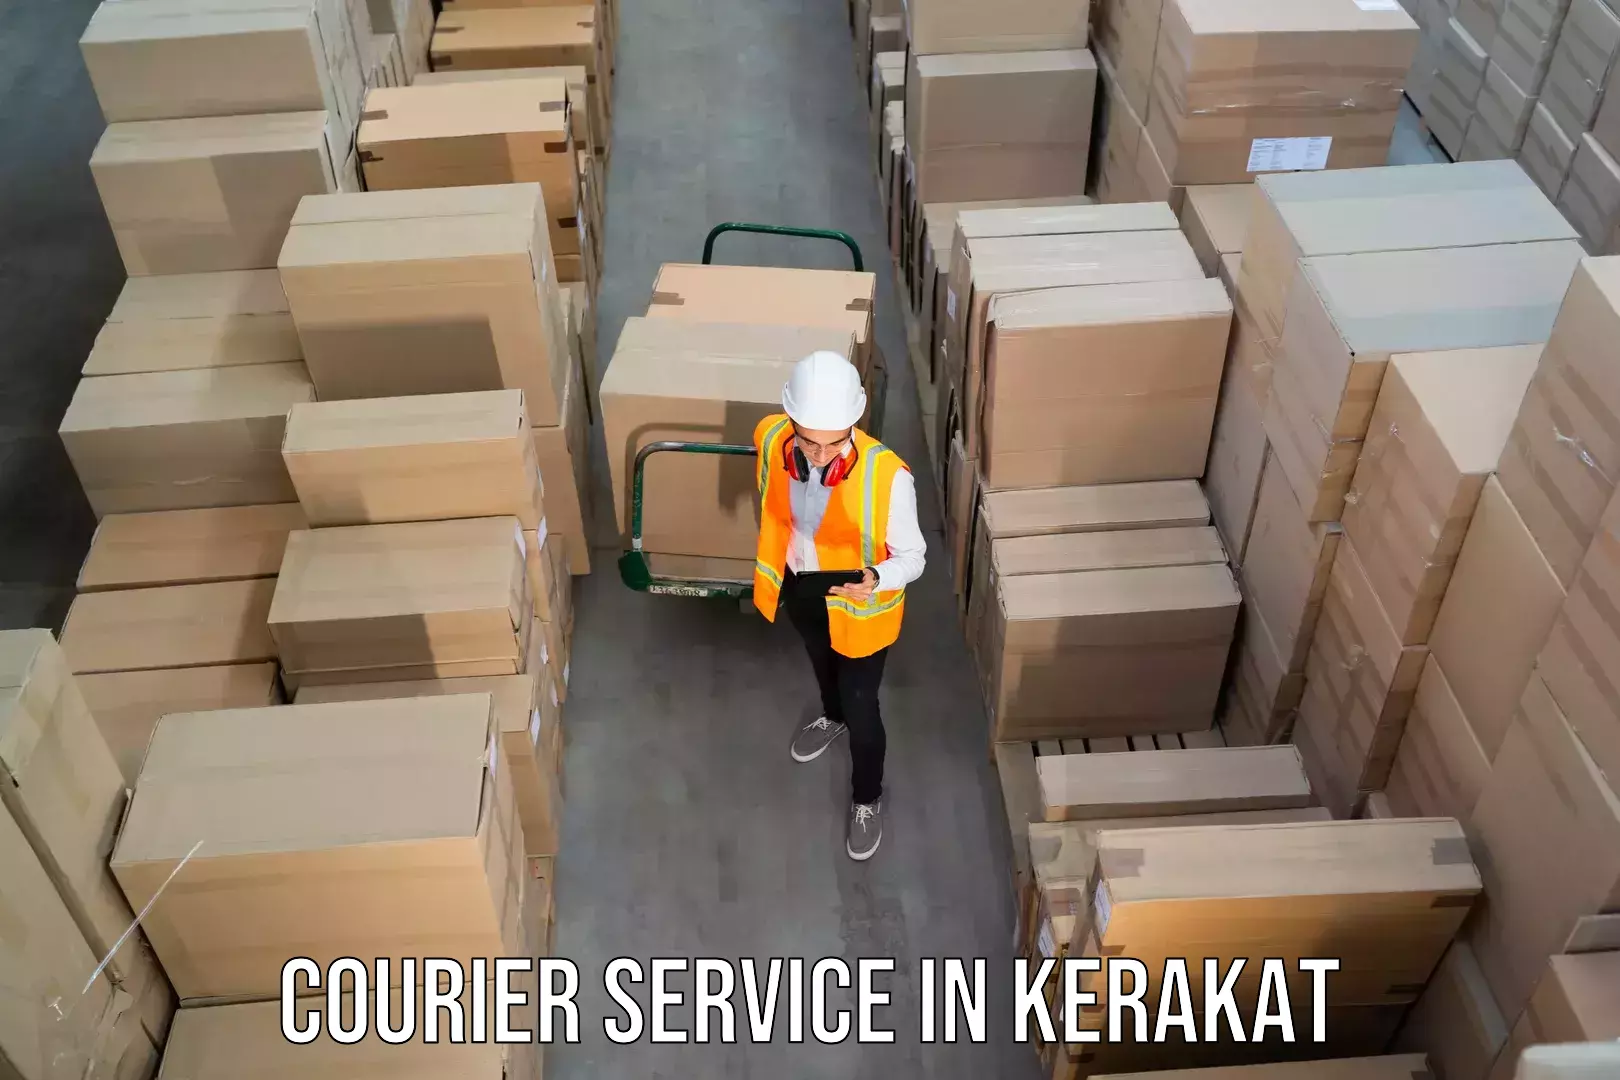 Quality courier partnerships in Kerakat